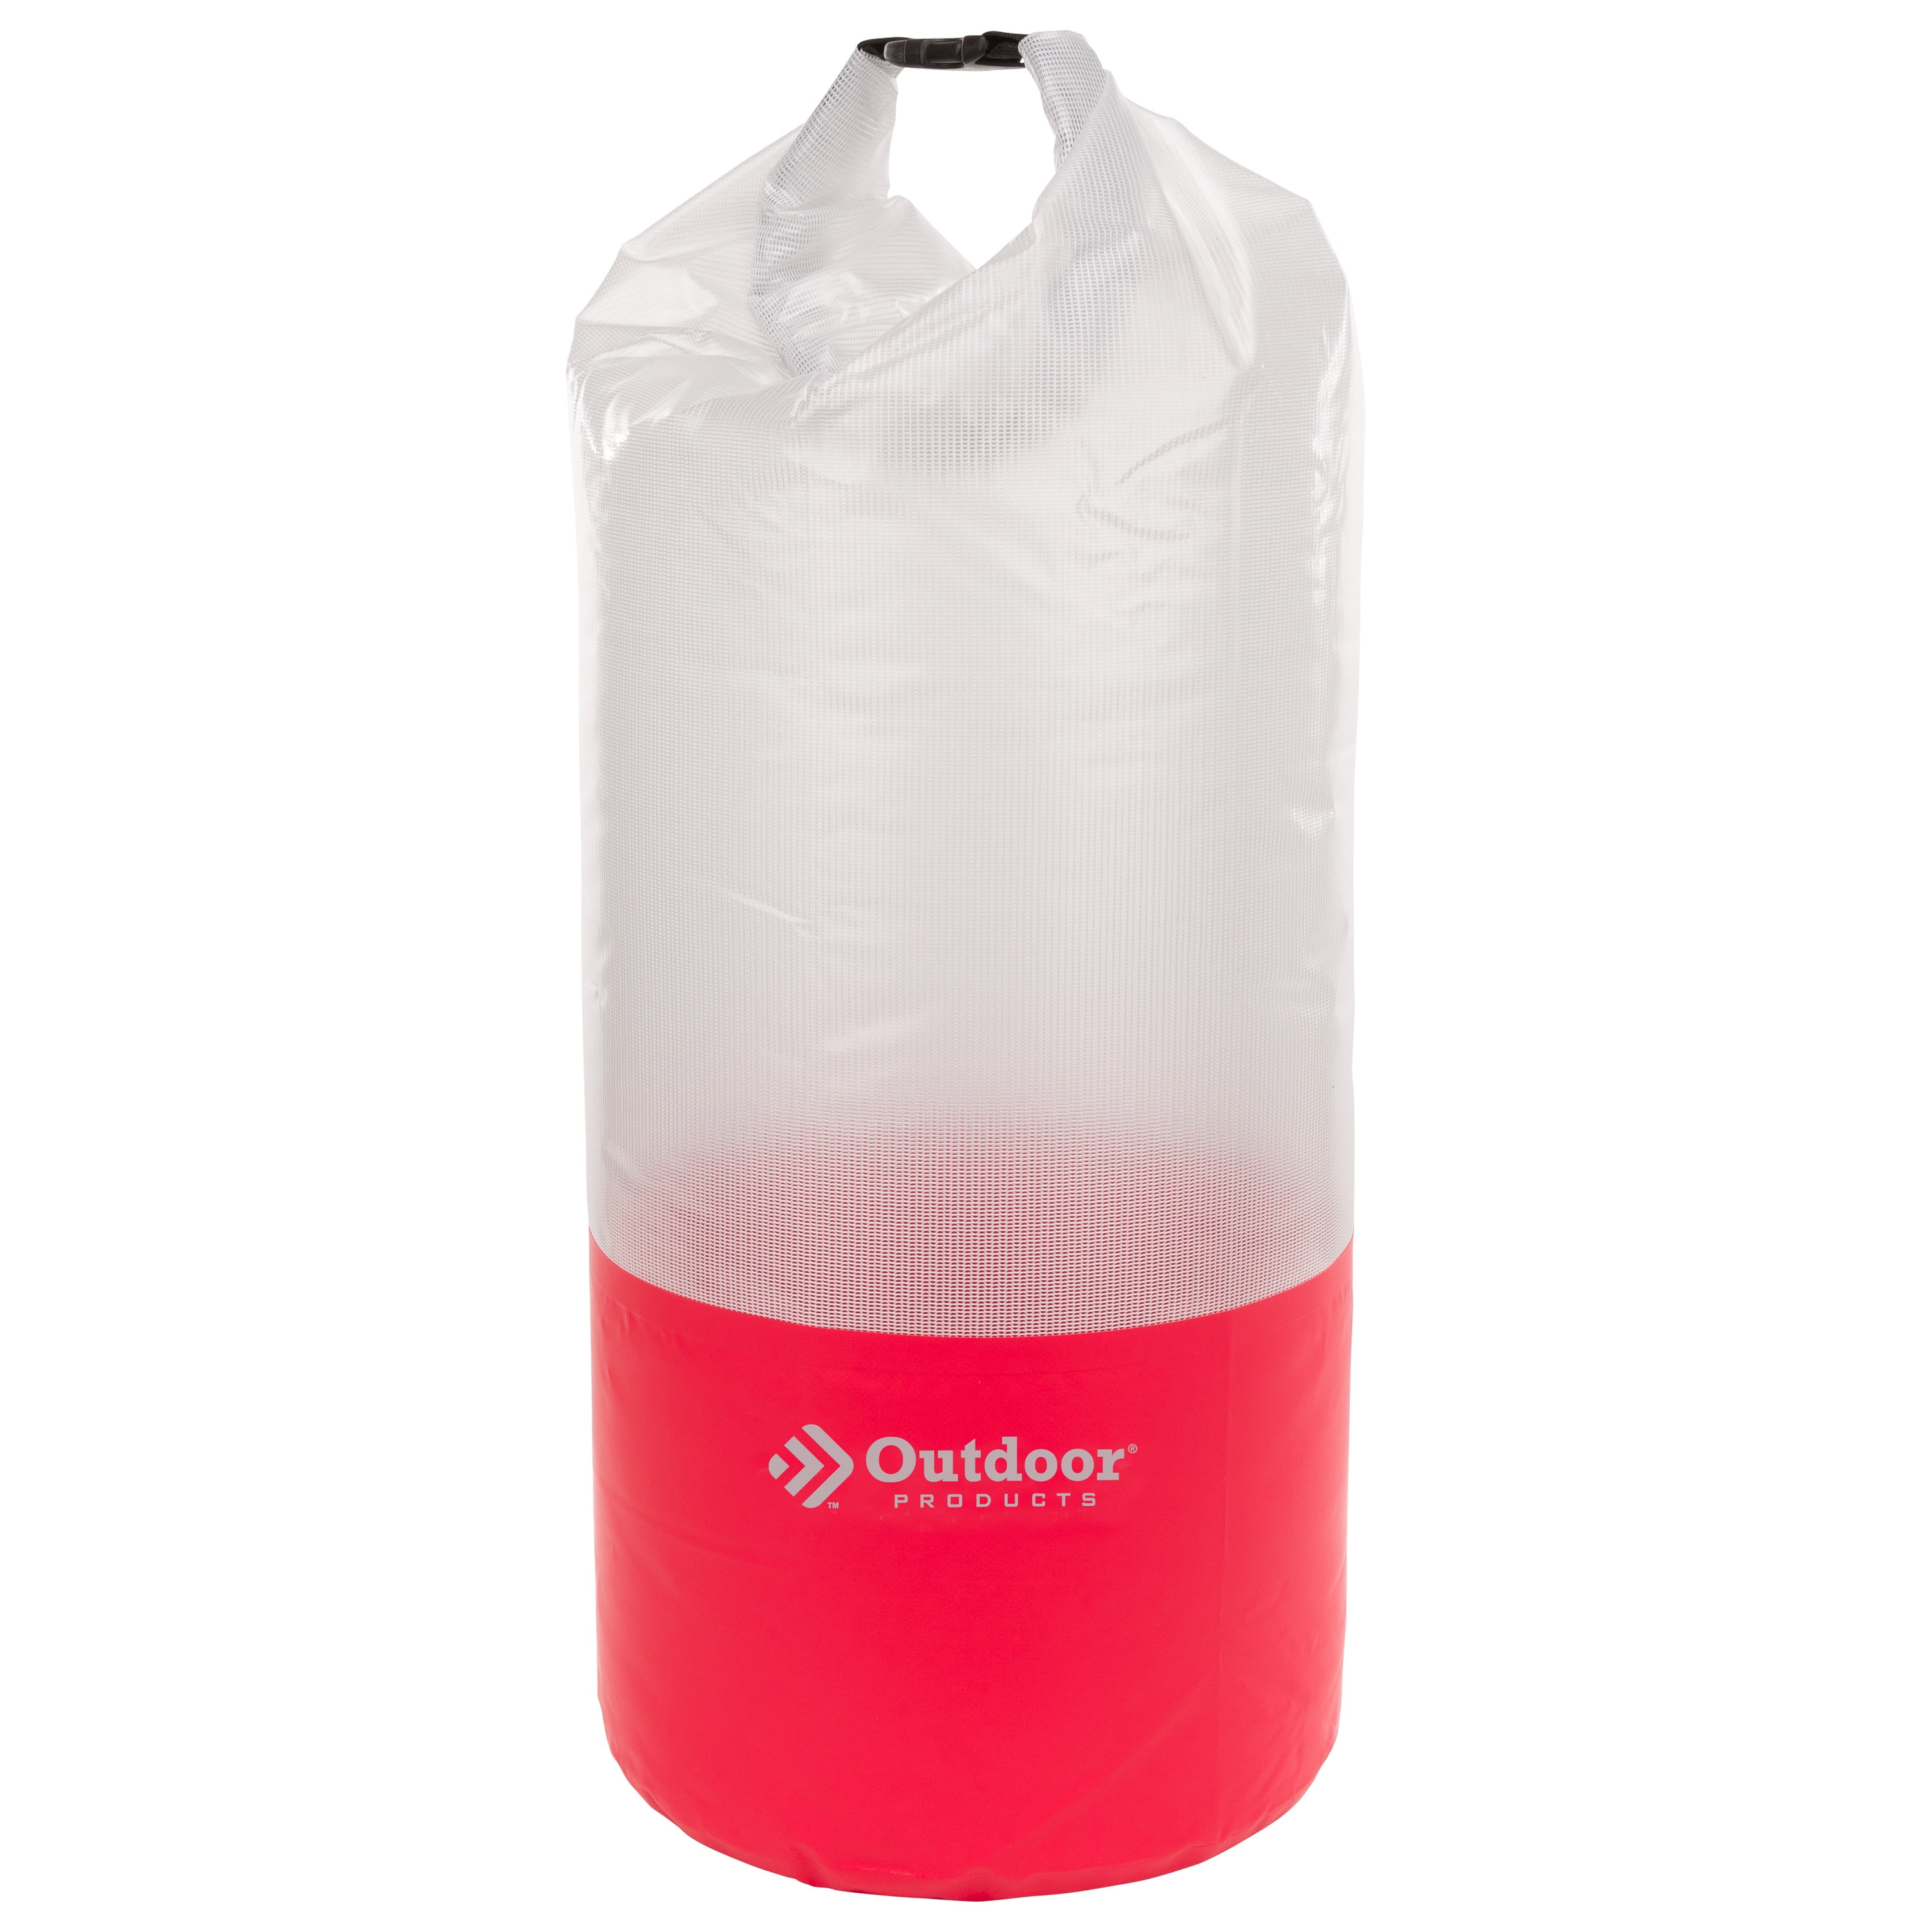 Outdoor Products 20l Valuables Dry Bag Clear 020968559785 for sale online 